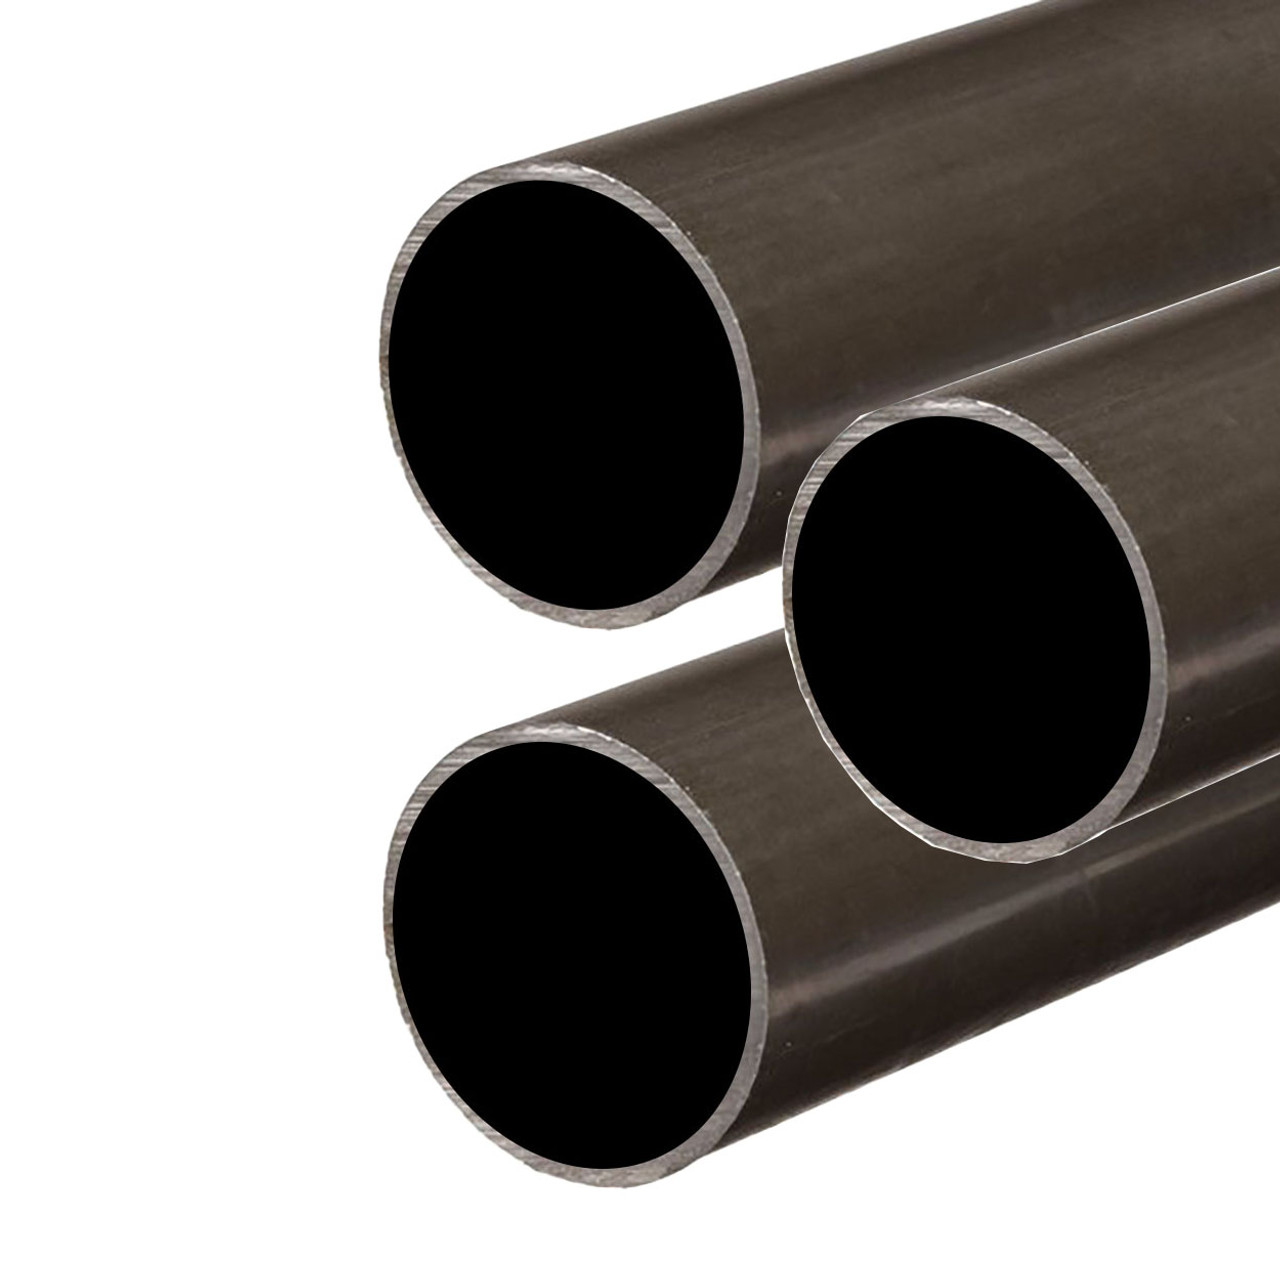 1.25" OD, 0.065" Wall, (1.120" ID) x 24 inches (3 Pack), ERW Steel Round Tube